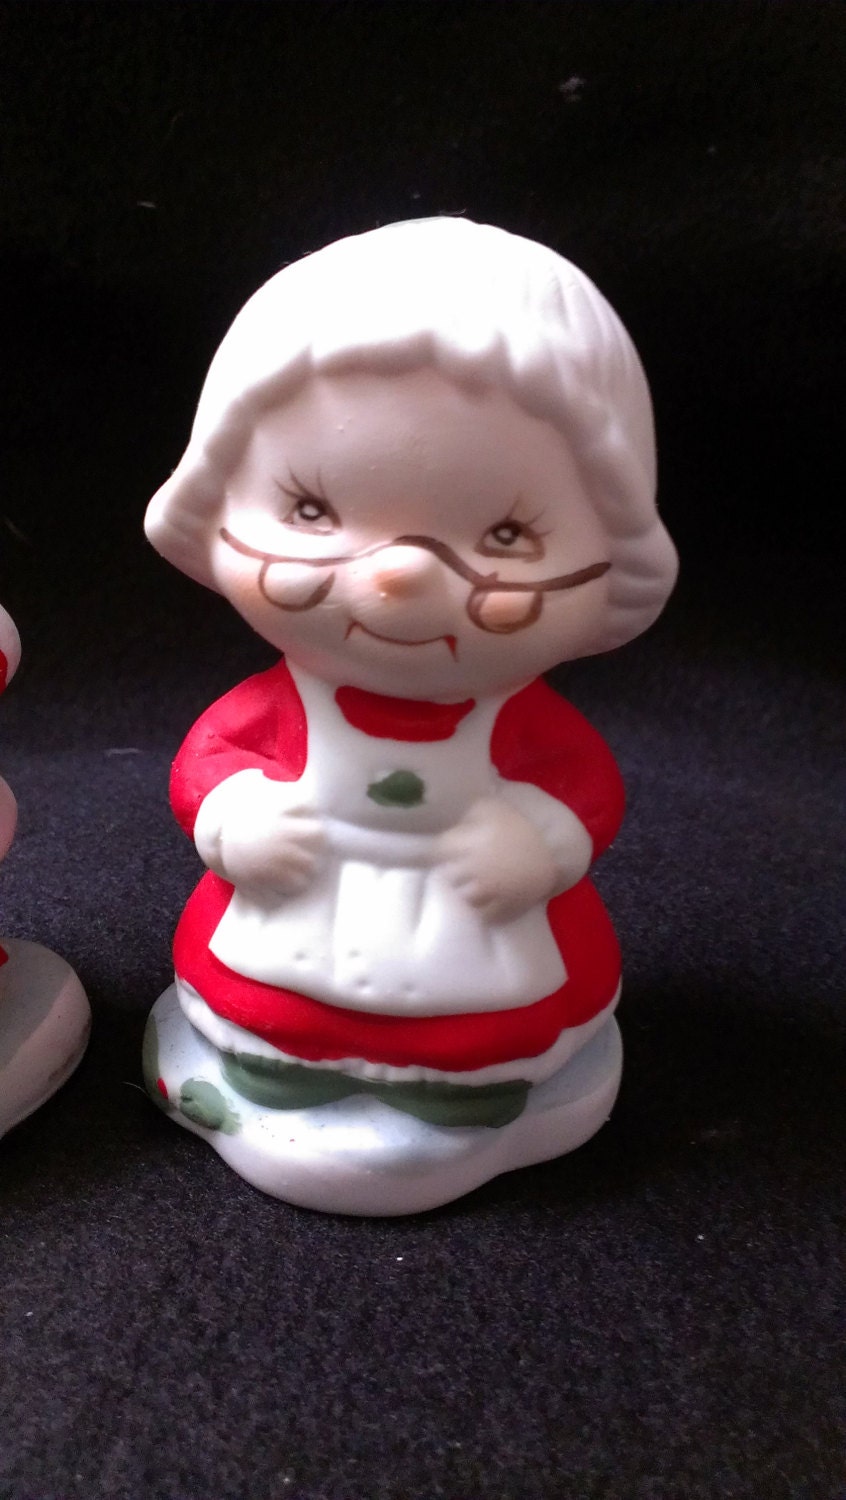 Mr and Mrs Clause Salt and Pepper Shakers in Original Box | Etsy